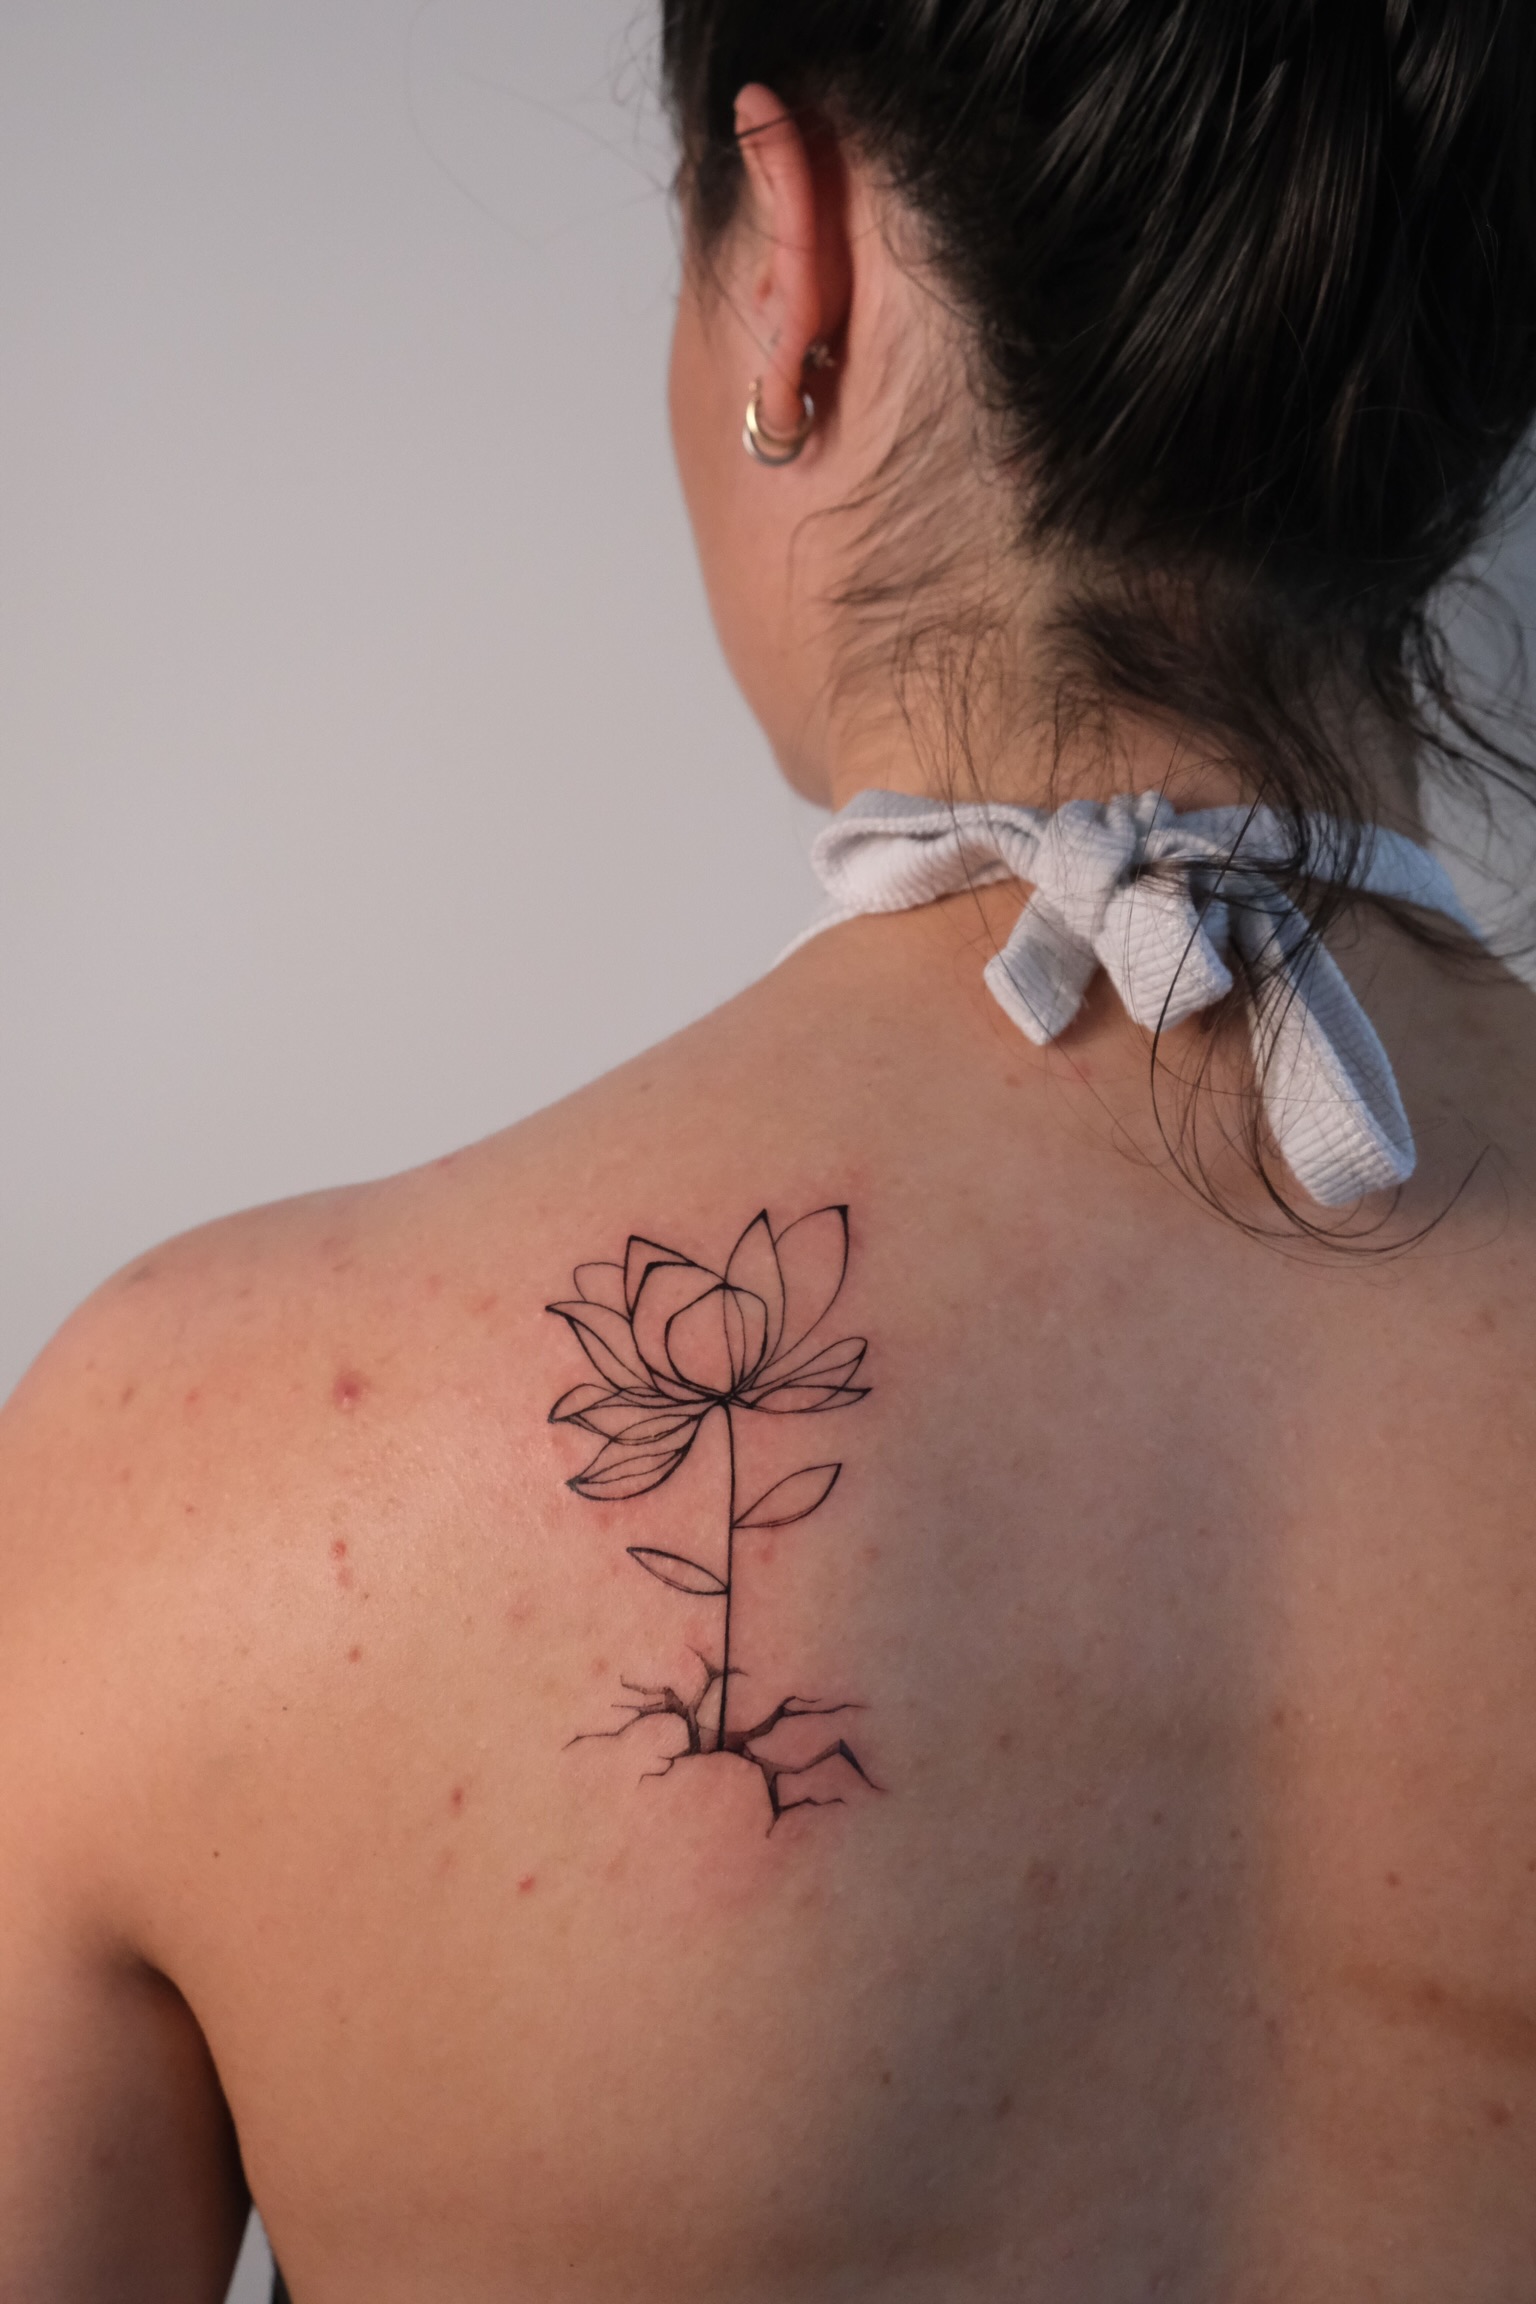 A Guide To Single Needle Tattoos (Illustrated)